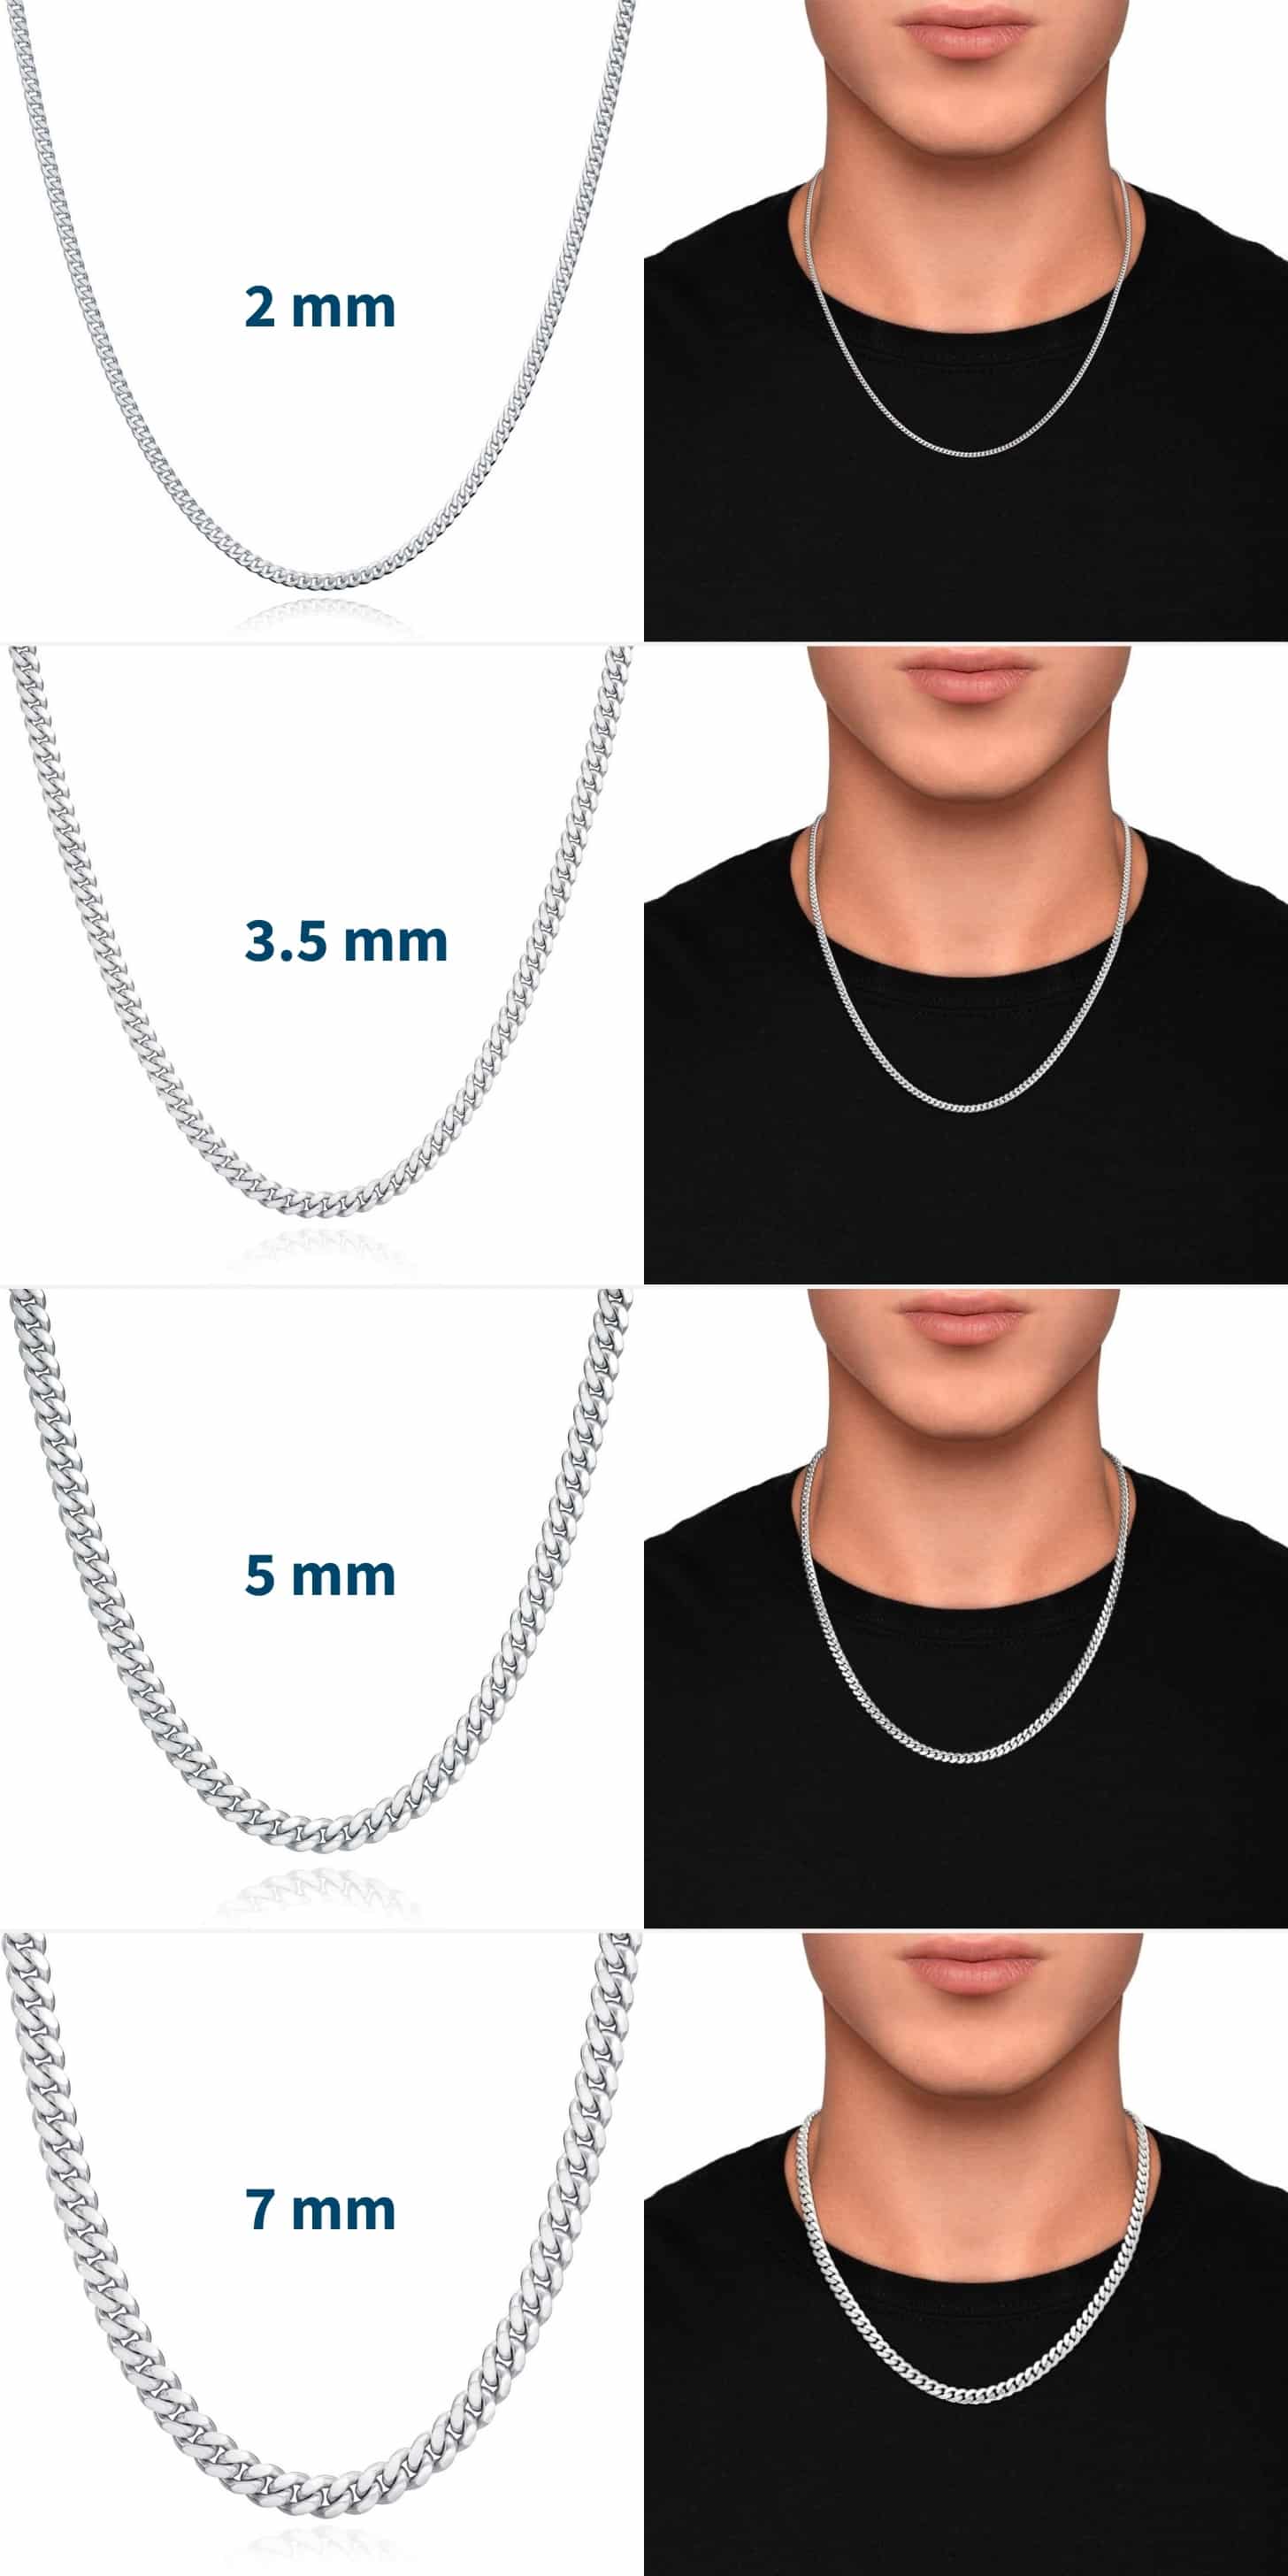 How To Wear Men's Necklaces The Complete Guide - Surflegacy